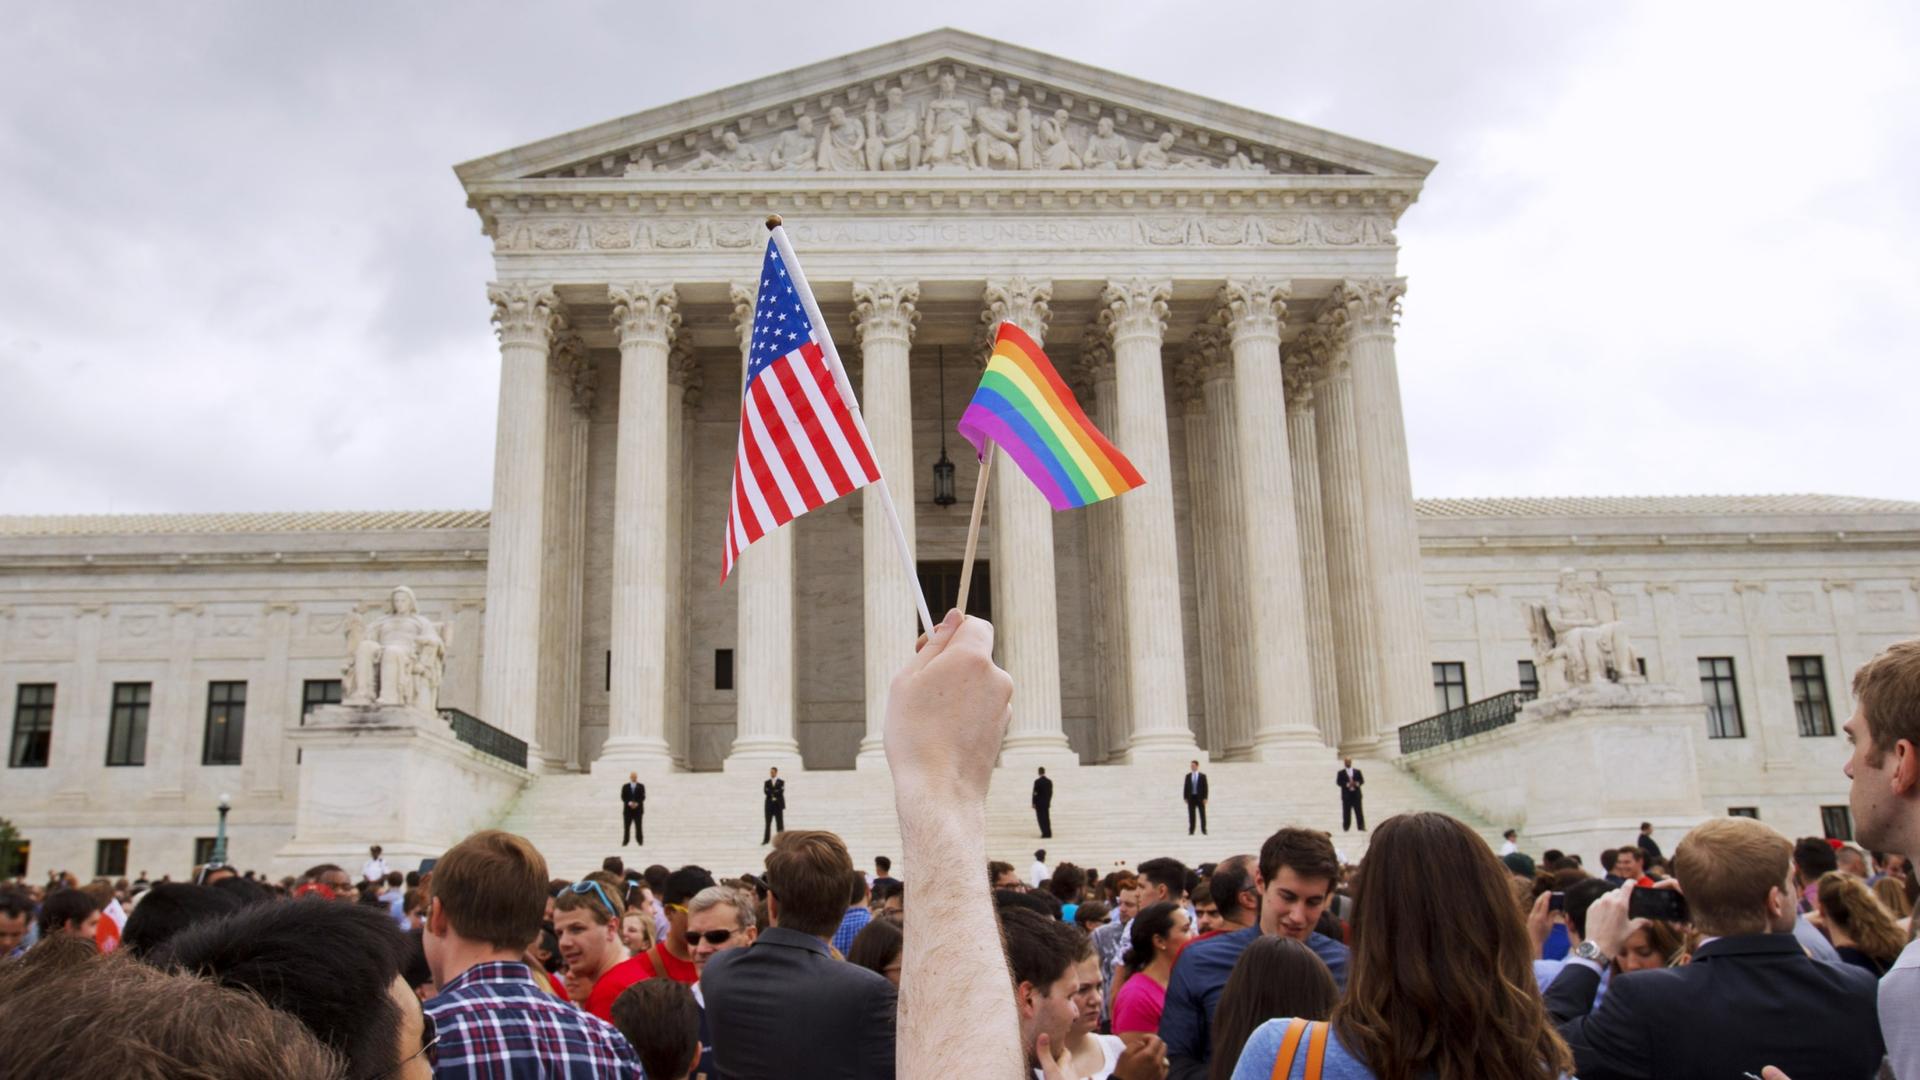 Arm holds up an American flag and a pride flag outside the US Supreme Court